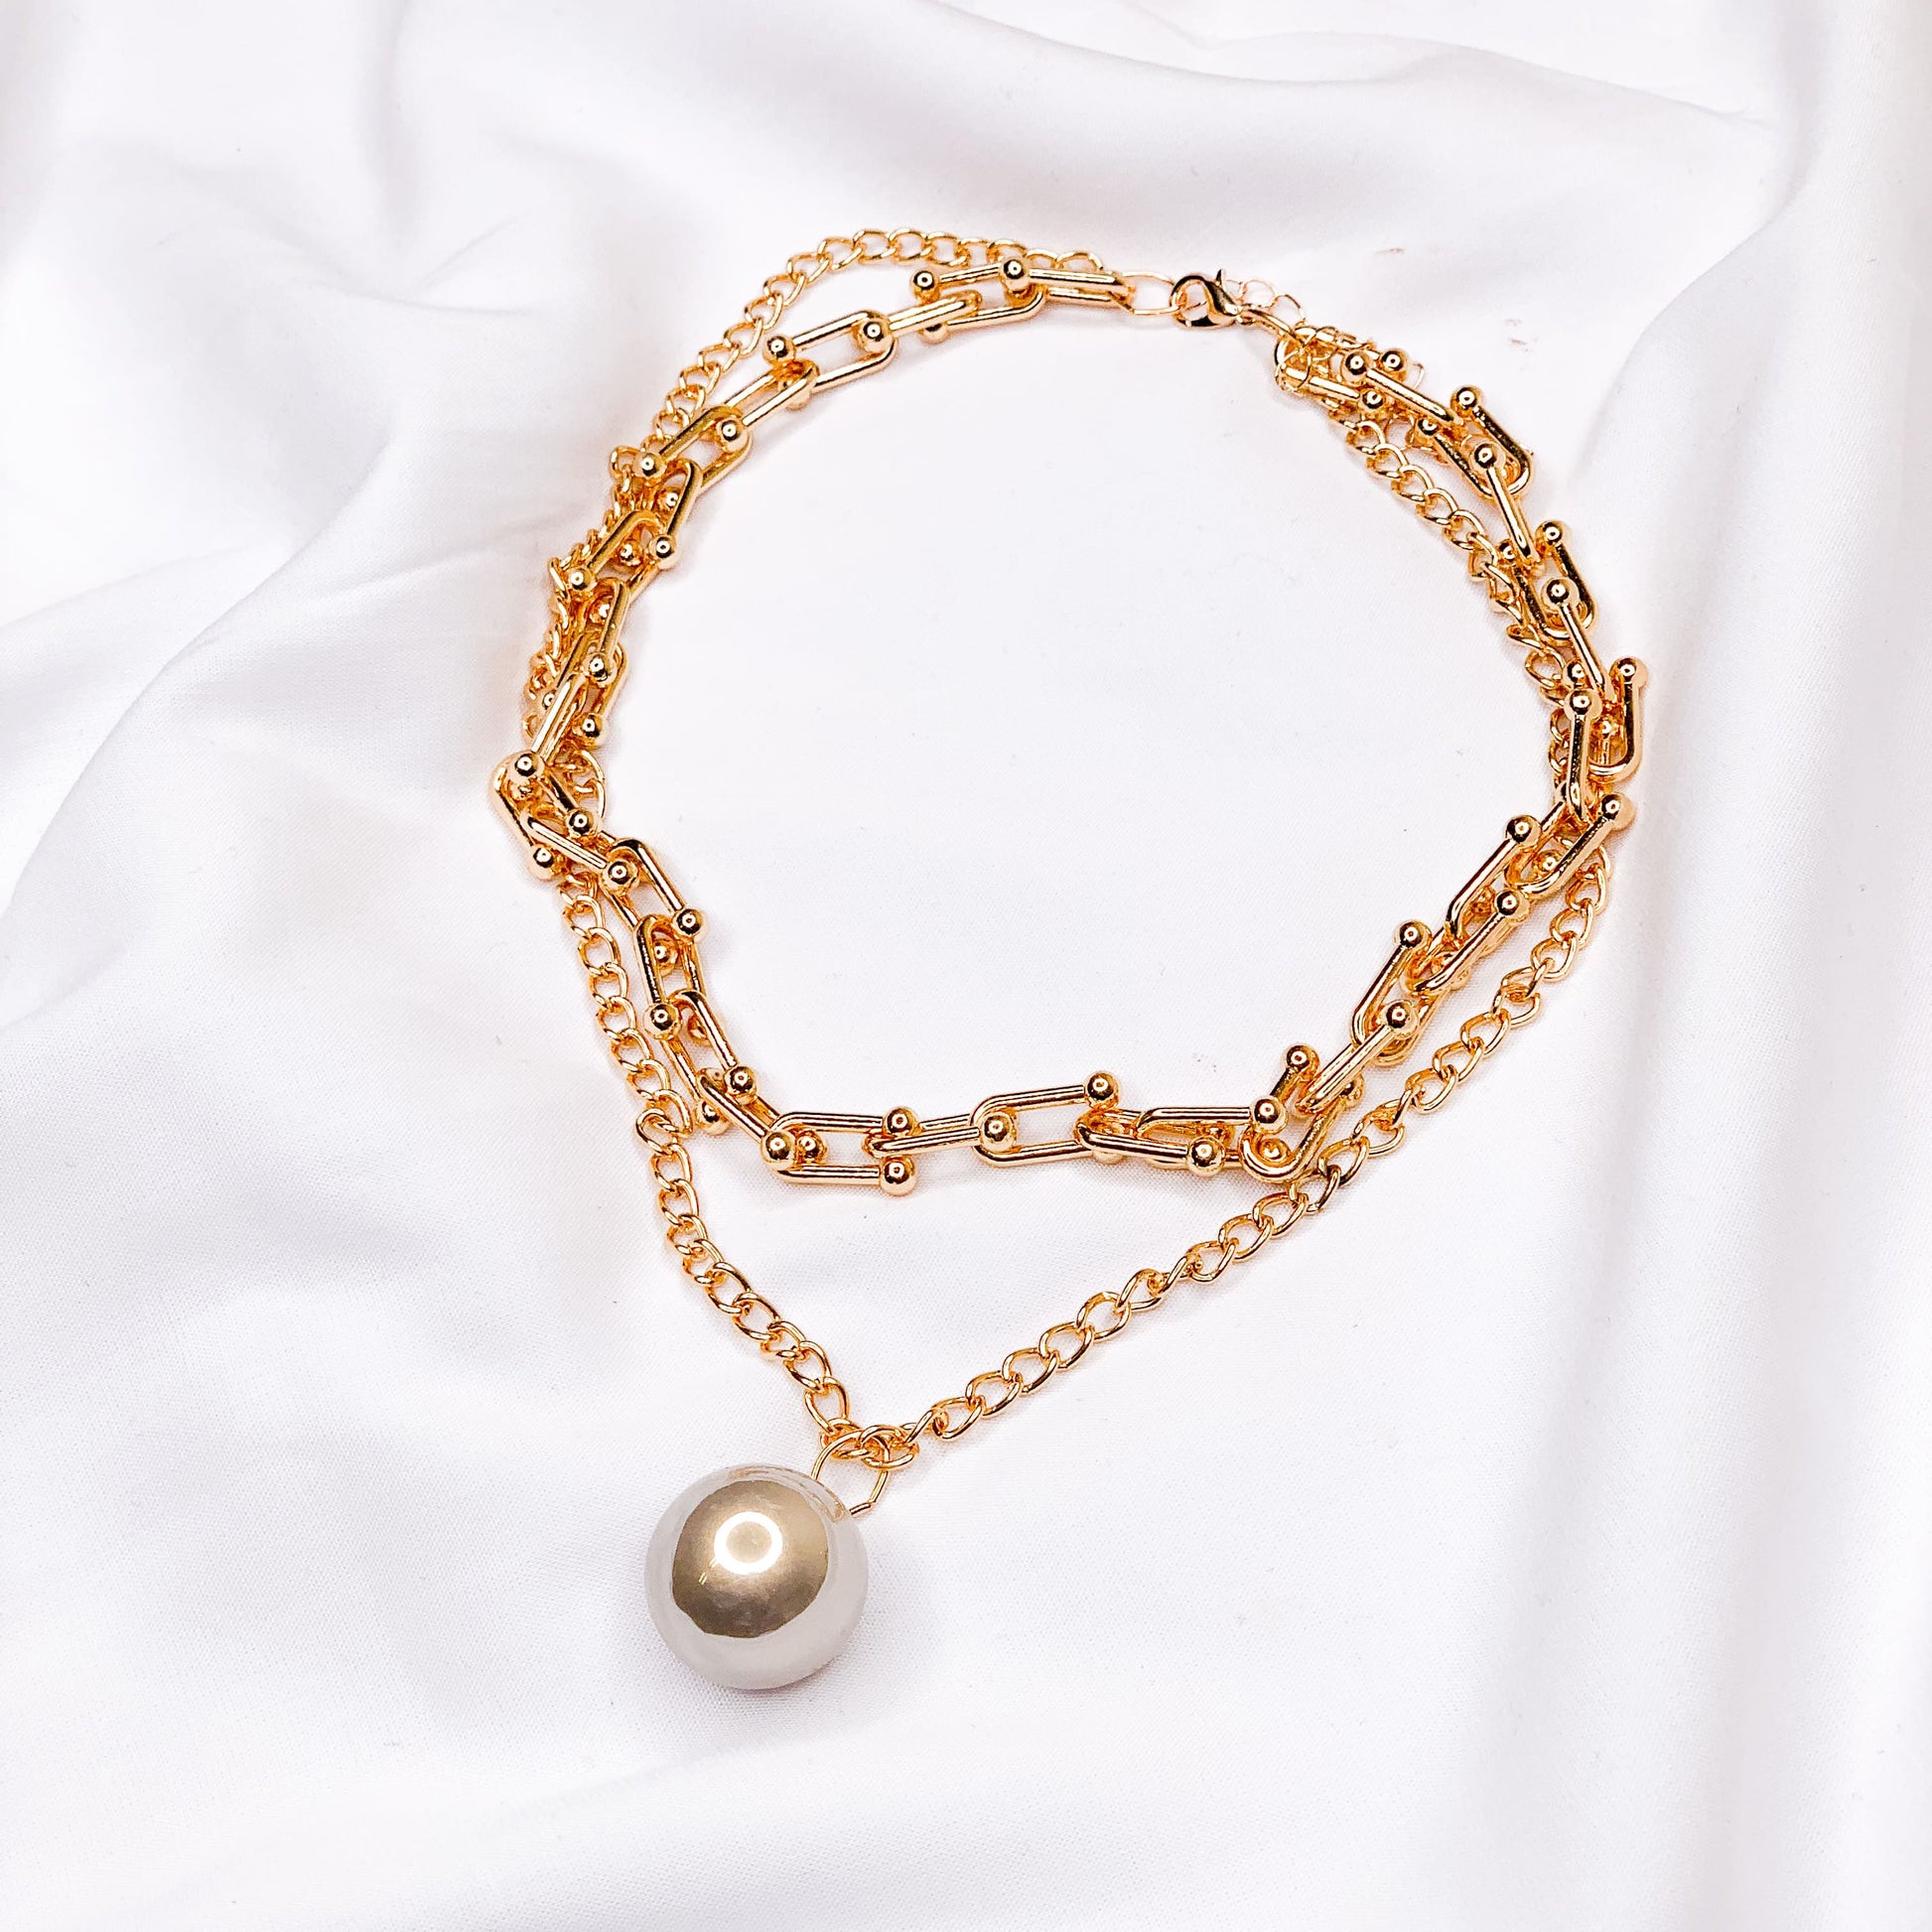 Hellen.V - Gold Necklaces & Ball Pendant | Jewelry 